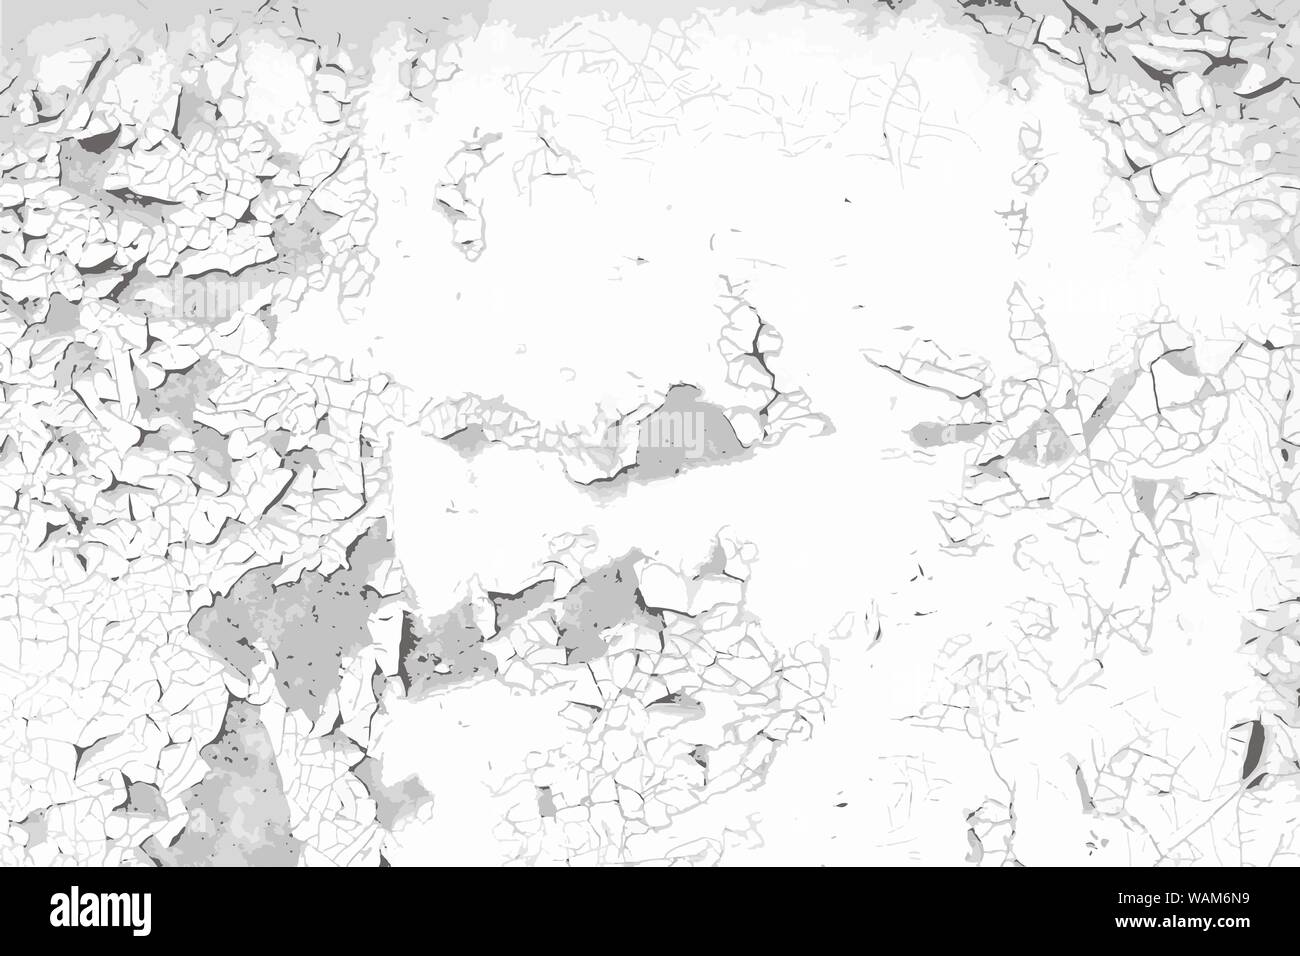 Old cracked painted wall vector background. Grunge black and white texture template for overlay artwork. Stock Vector